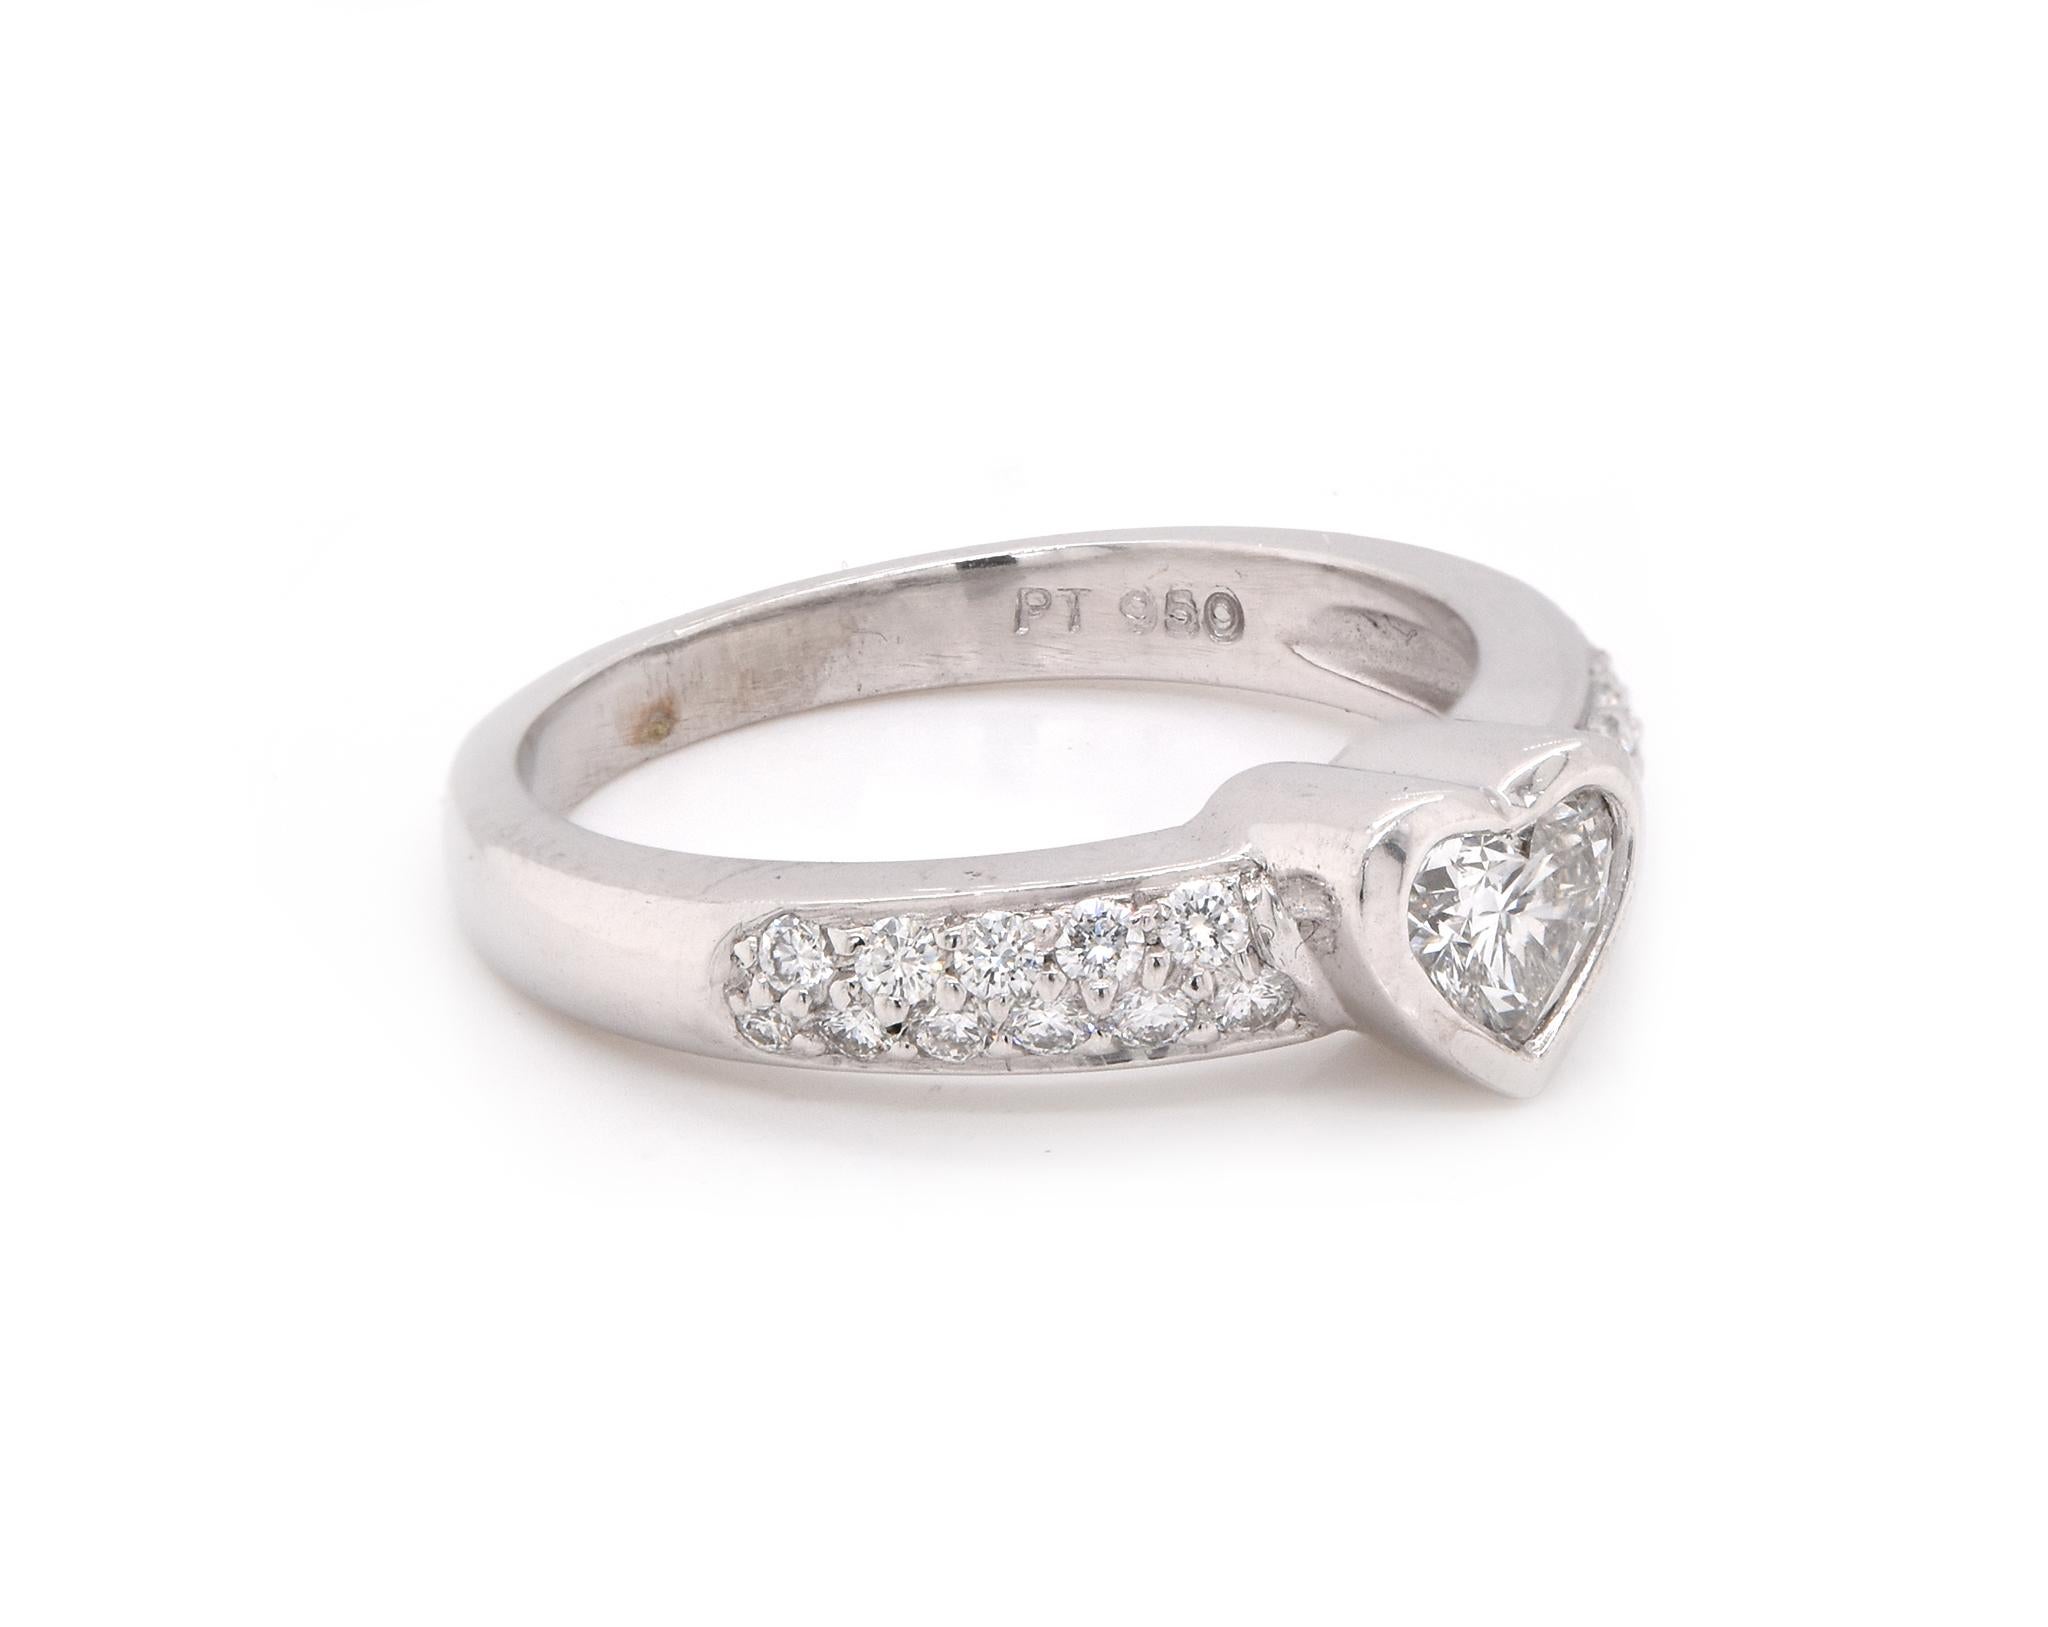 Material: Platinum 
Center Diamond: 1 heart cut = .45ct
Color: G
Clarity: VS2
Diamonds: 22 round cut = .33cttw
Color: G
Clarity: VS2
Ring Size: 7.5 (please allow up to 2 additional business days for sizing requests)
Dimensions: ring shank measures